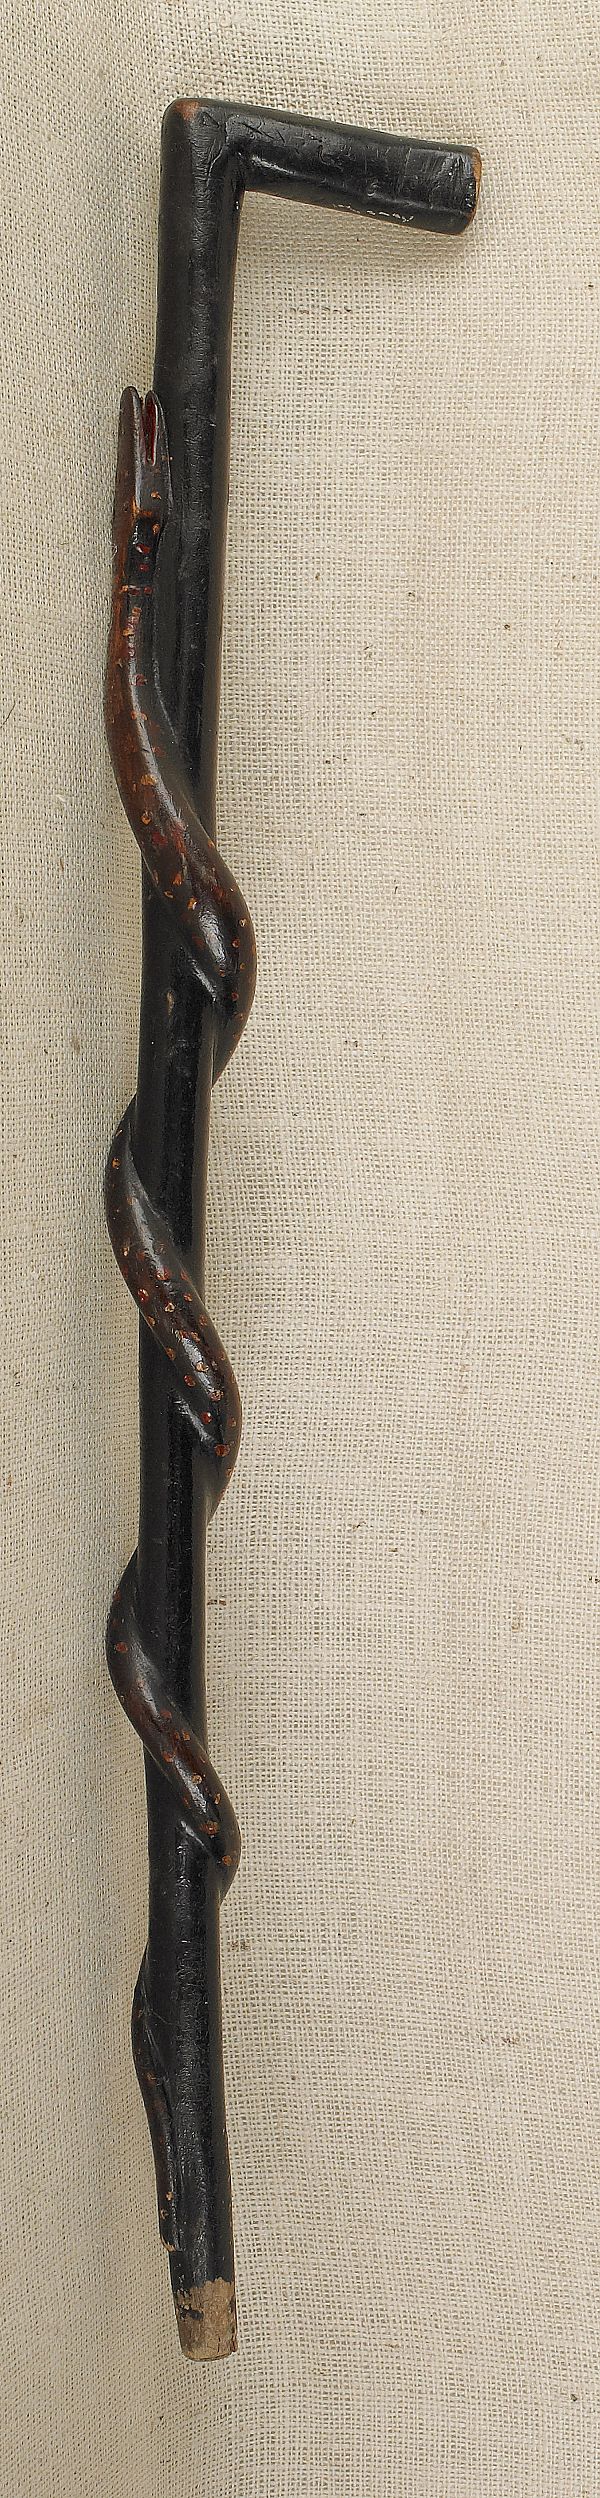 Carved and painted cane with a